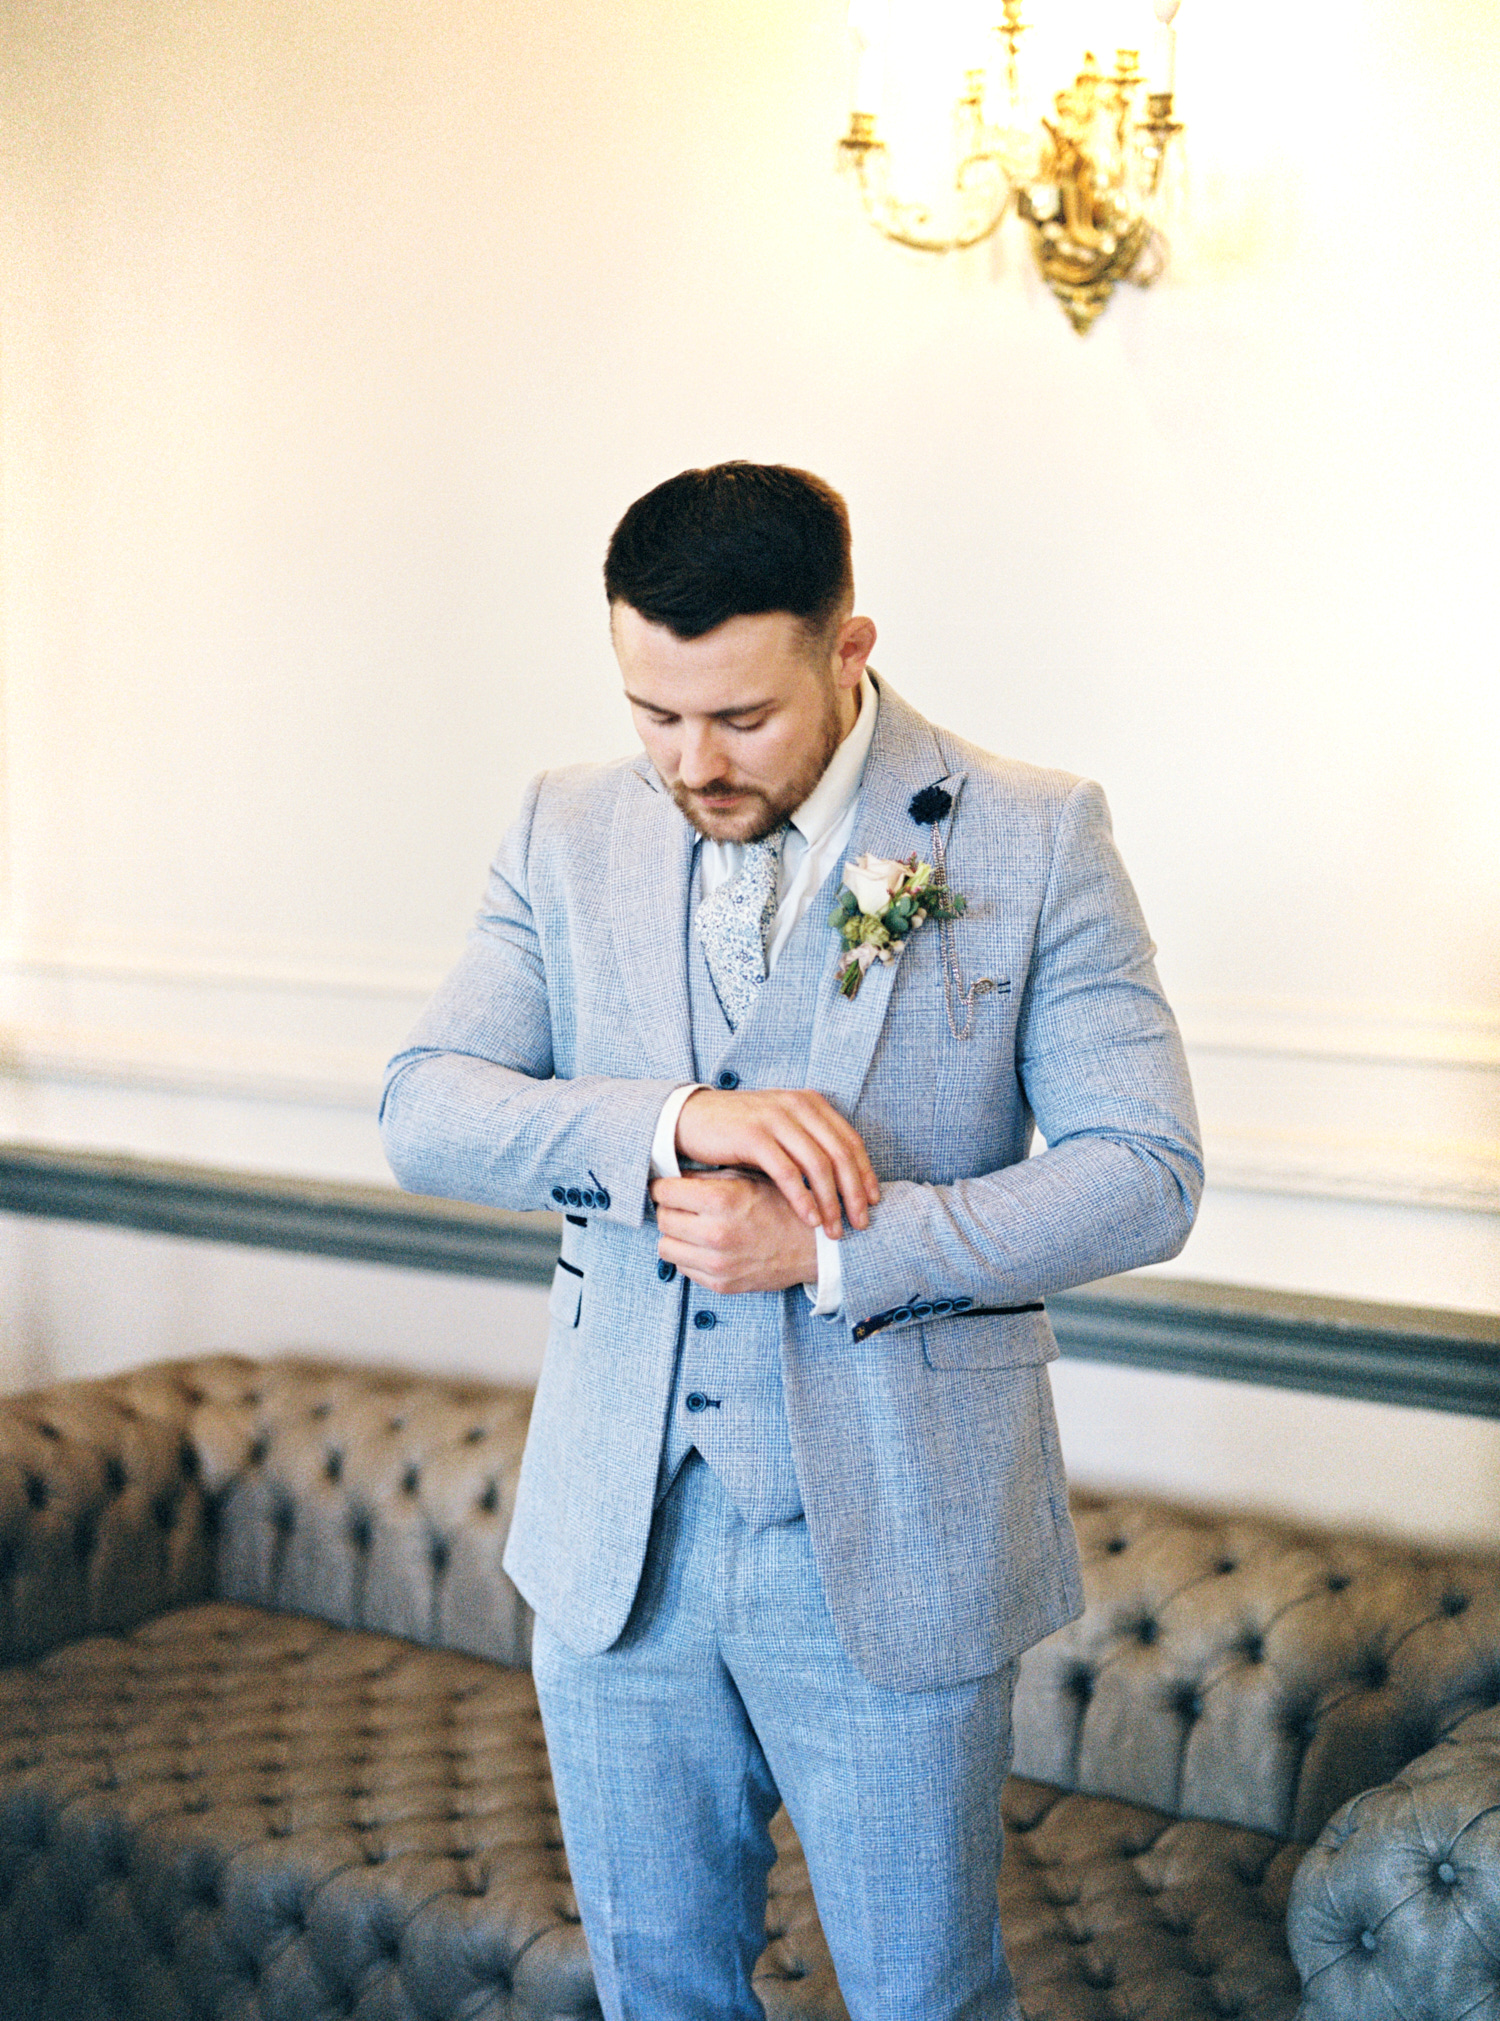 groom wearing blue suit with a tie standing and preparing for wedding ceremony